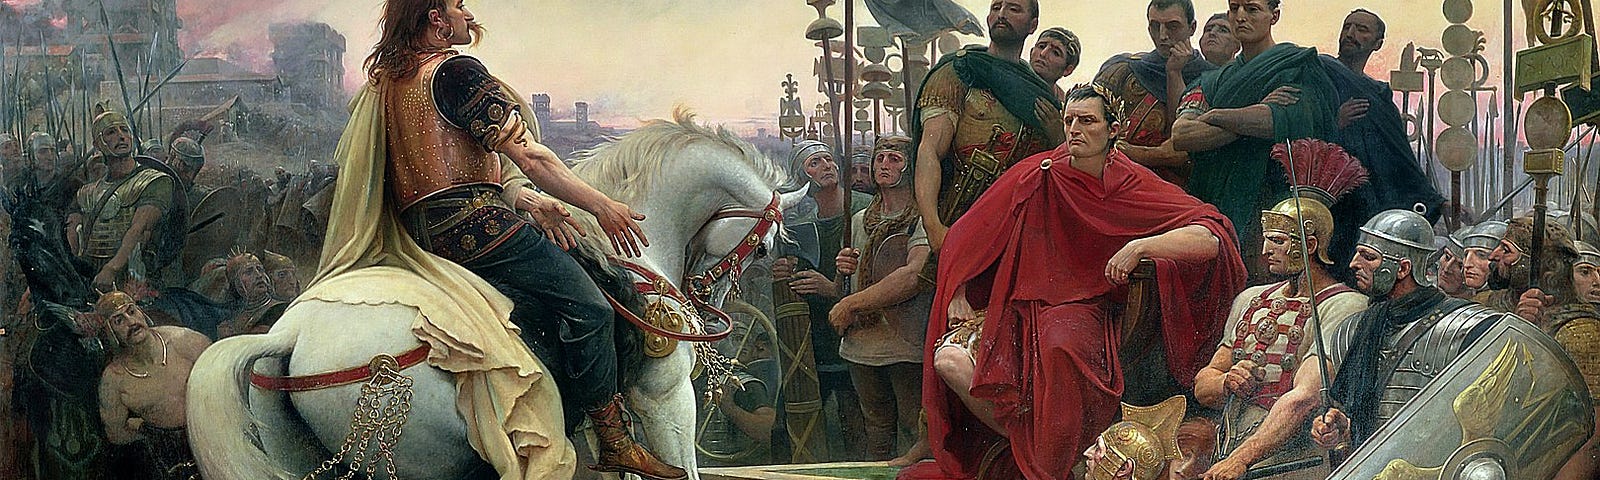 Famous, but over-dramatized painting of Vercingetorix on a white horse throwing down his arms at the feet of a seated victorious Julius Caesar after the defeat of Gallic forces at Alesia, ending most resistance to Roman rule in Gaul.